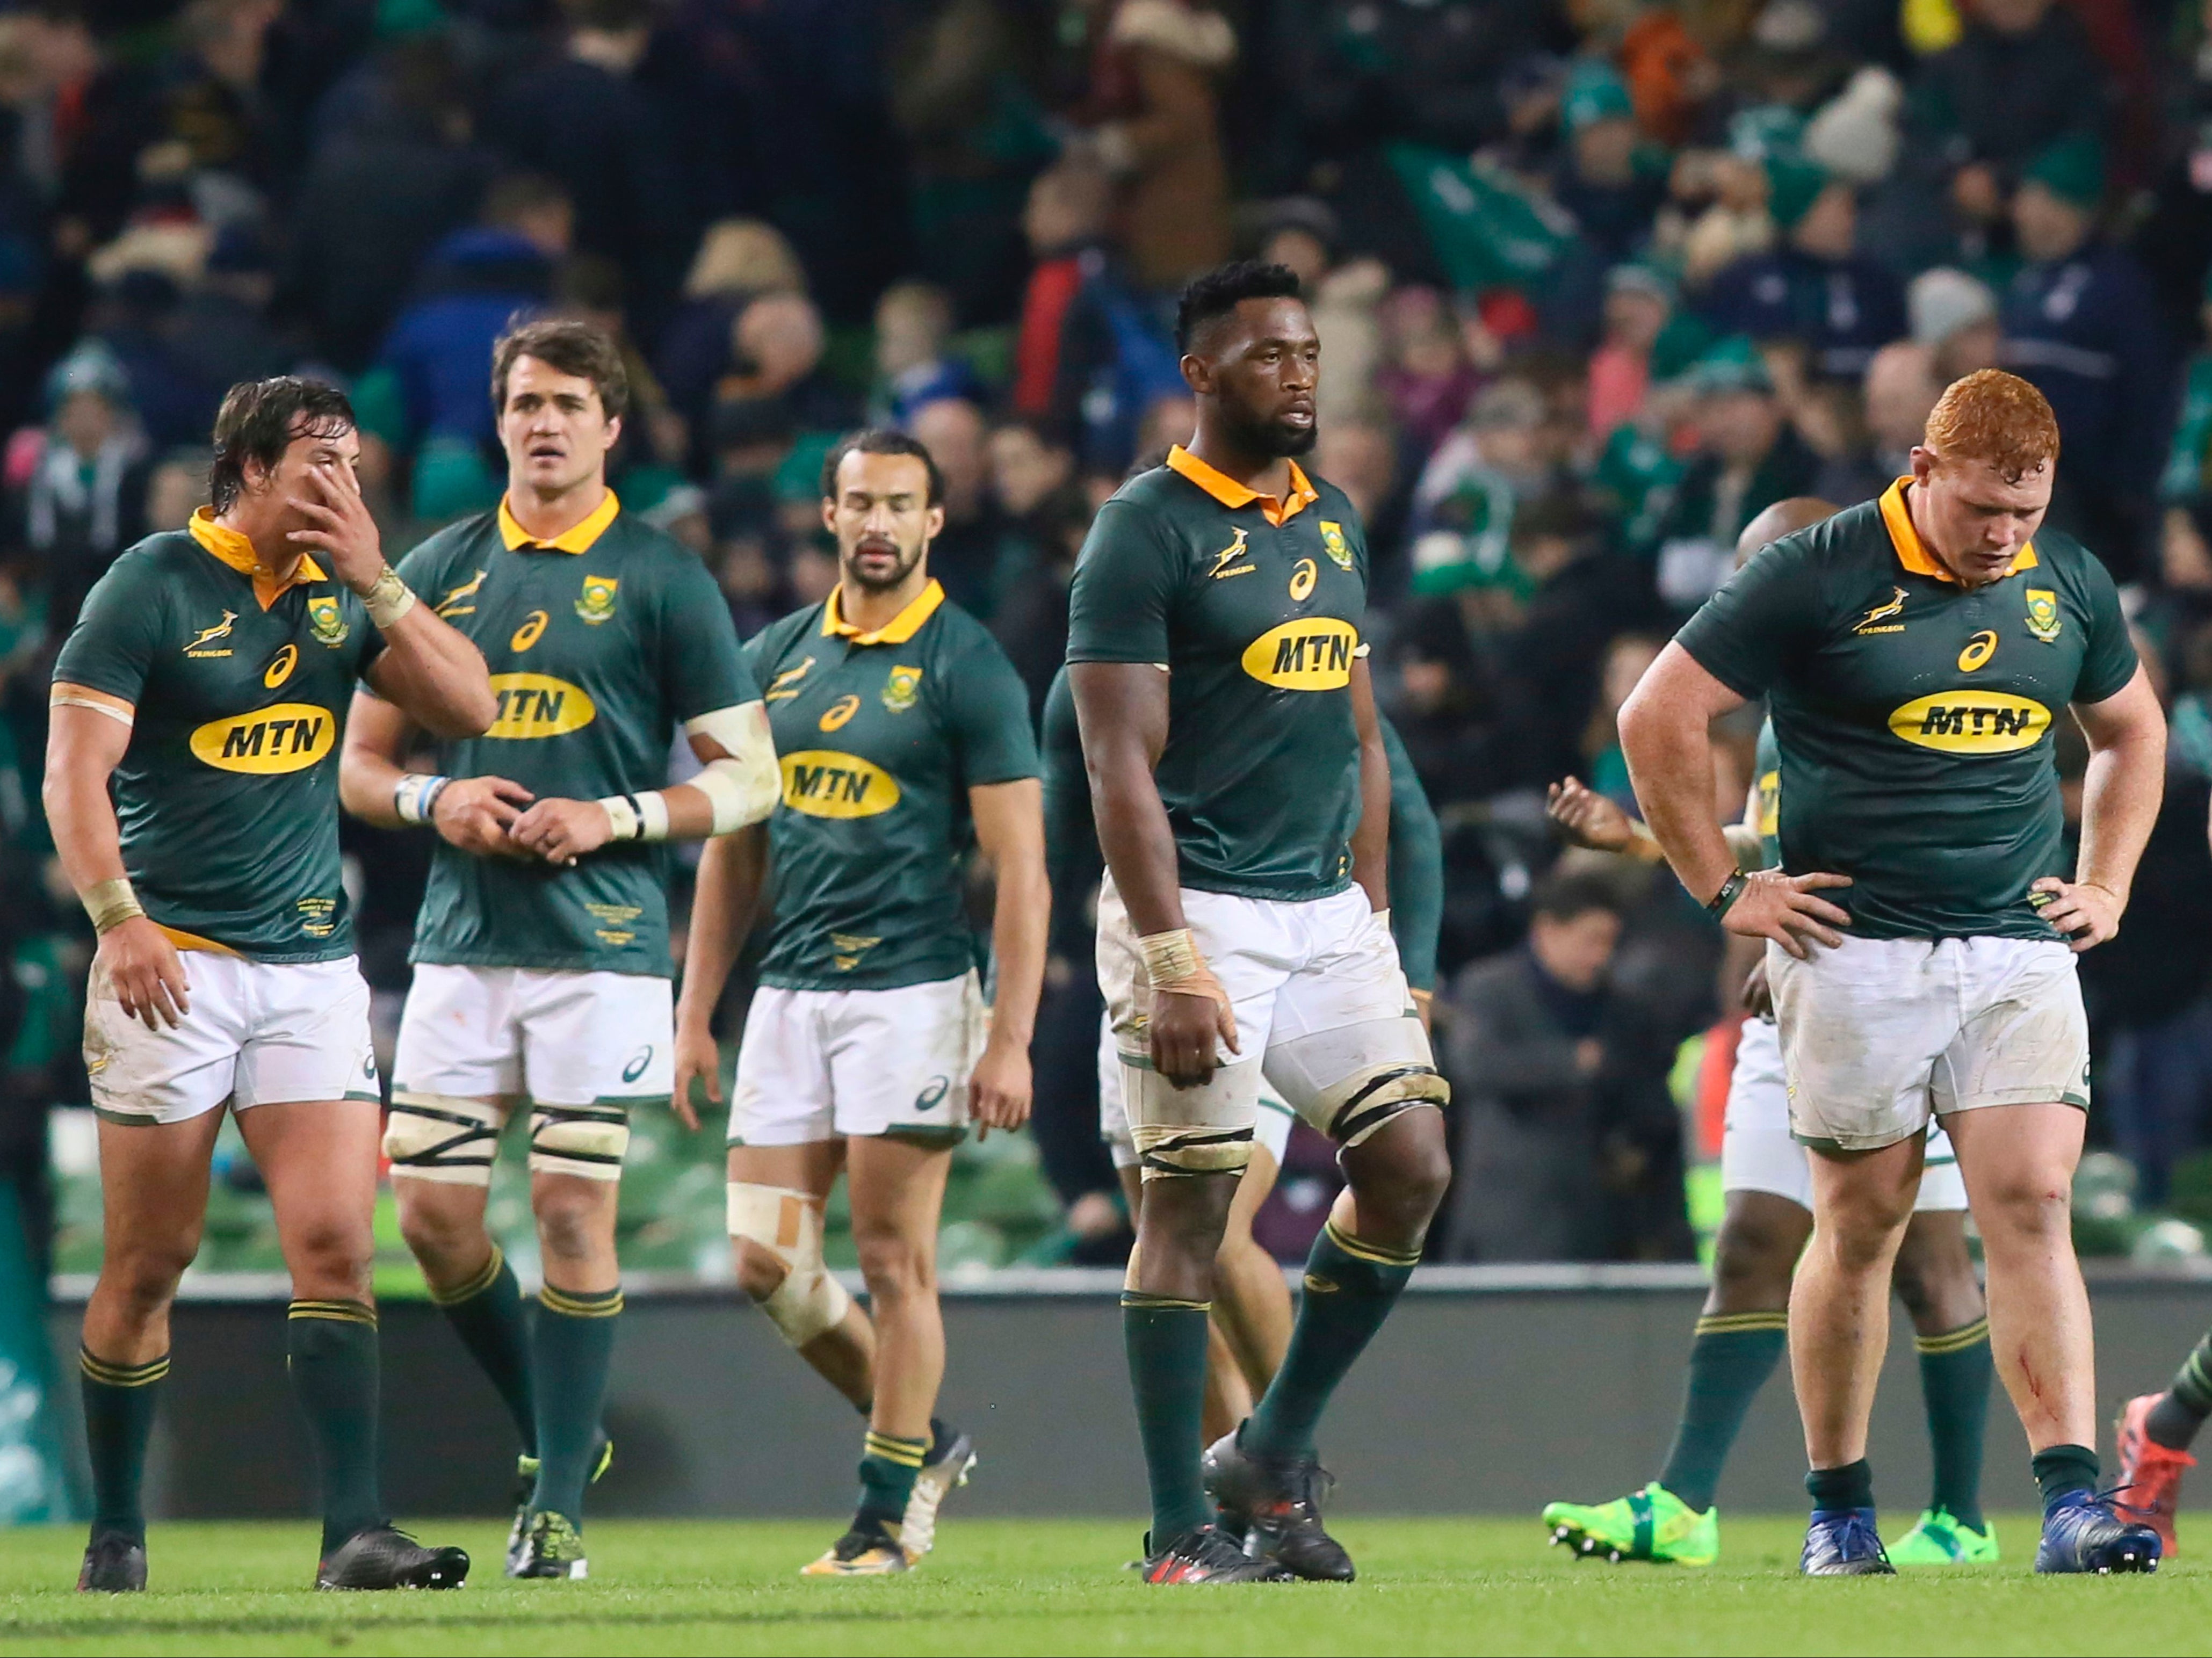 The Springboks have not faced the Irish since suffering a 38-3 thrashing in 2017